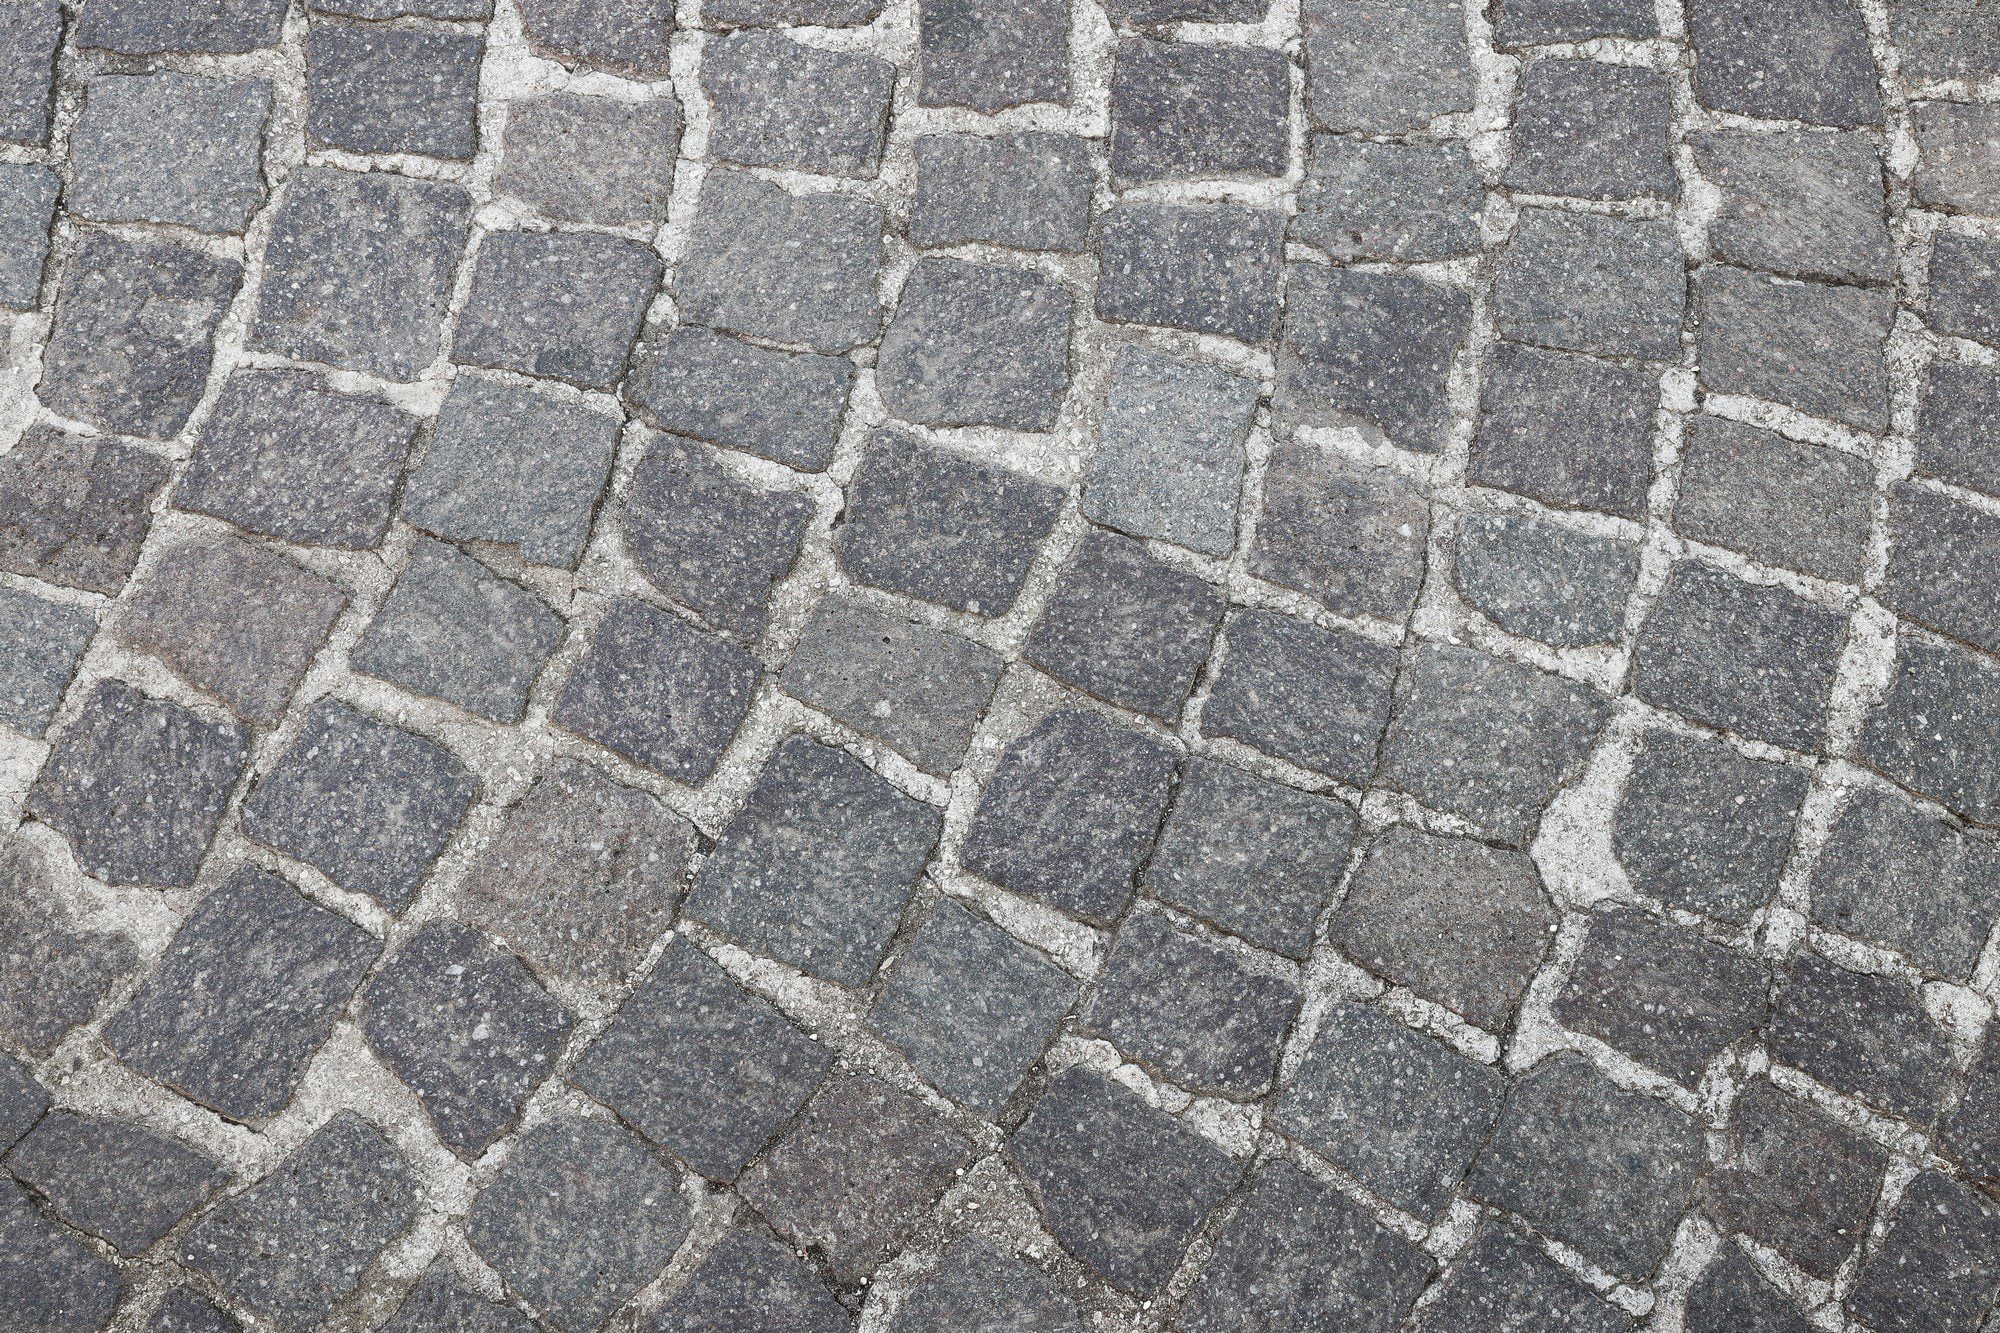 The image shows a close-up view of a cobblestone pavement. The stones are arranged in a somewhat staggered pattern, with lines of smaller, rectangular stones creating a border or pattern within the larger cobblestone layout. The colours of the stones are mostly shades of gray, and the surface appears to be worn, suggesting that the pavement has been used for some time. Such cobblestone surfaces are common in historic or picturesque areas and are known for their durability and aesthetic appeal.